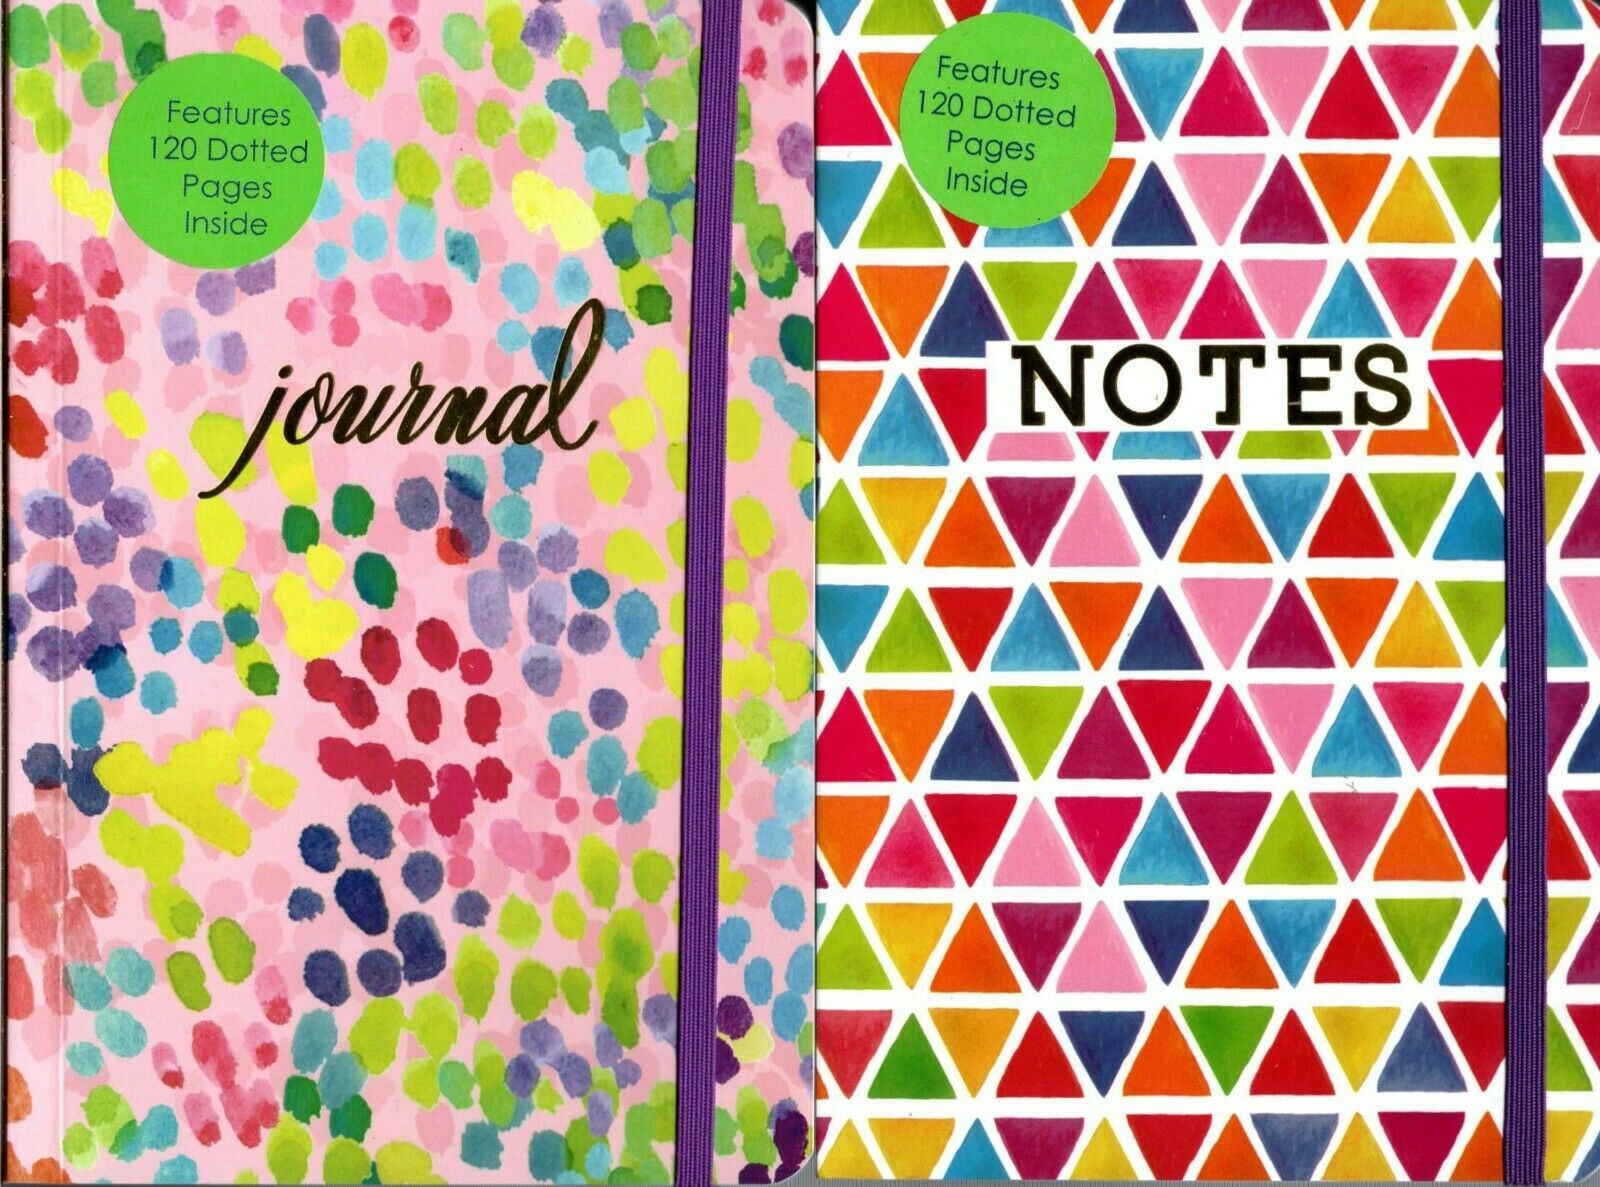 Primary image for Notebook - Features 120 Dotted Pages Inside Journal (Set of 2)